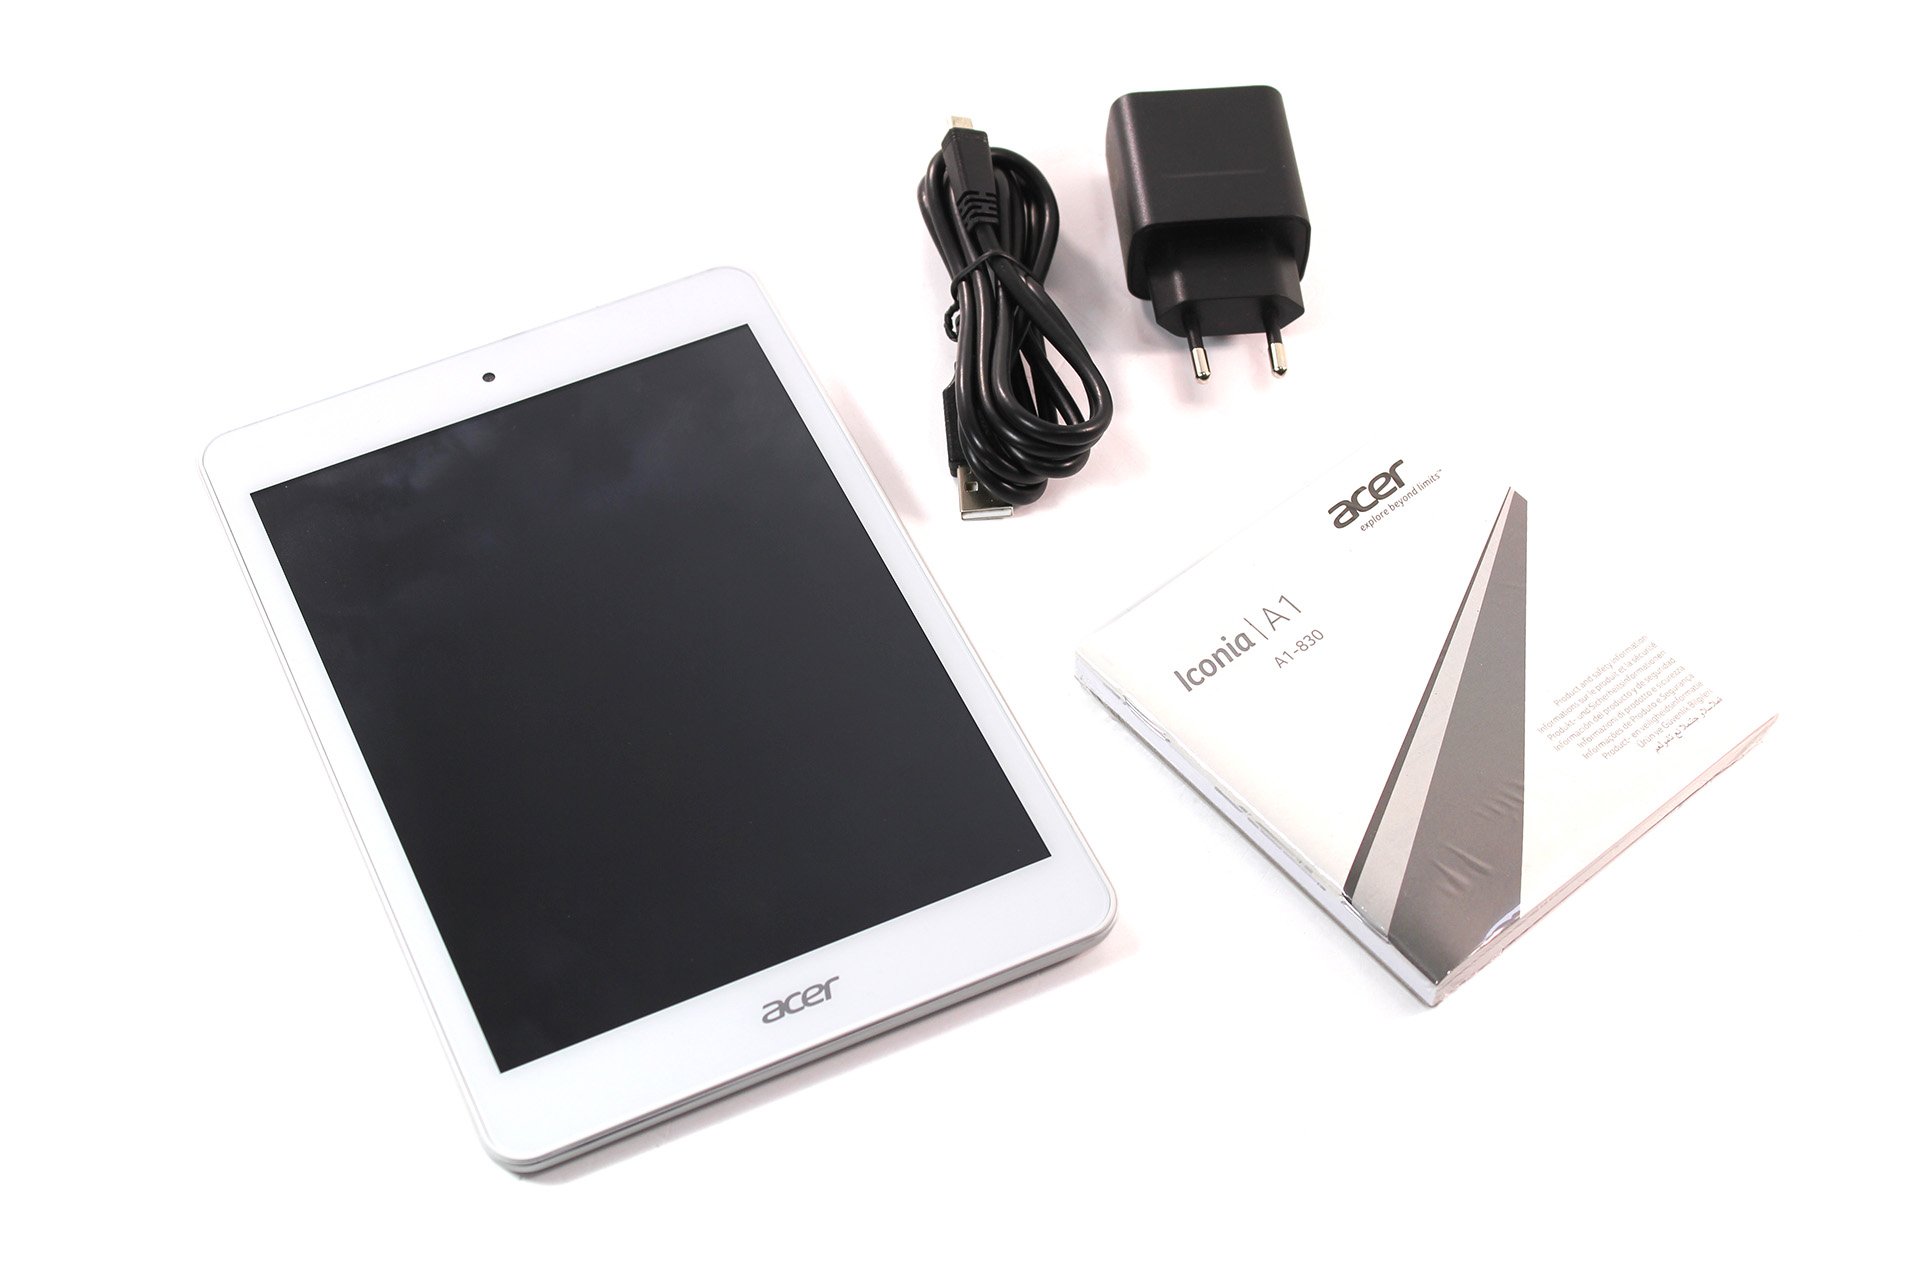 Acer Iconia A1-830 - Lieferumfang